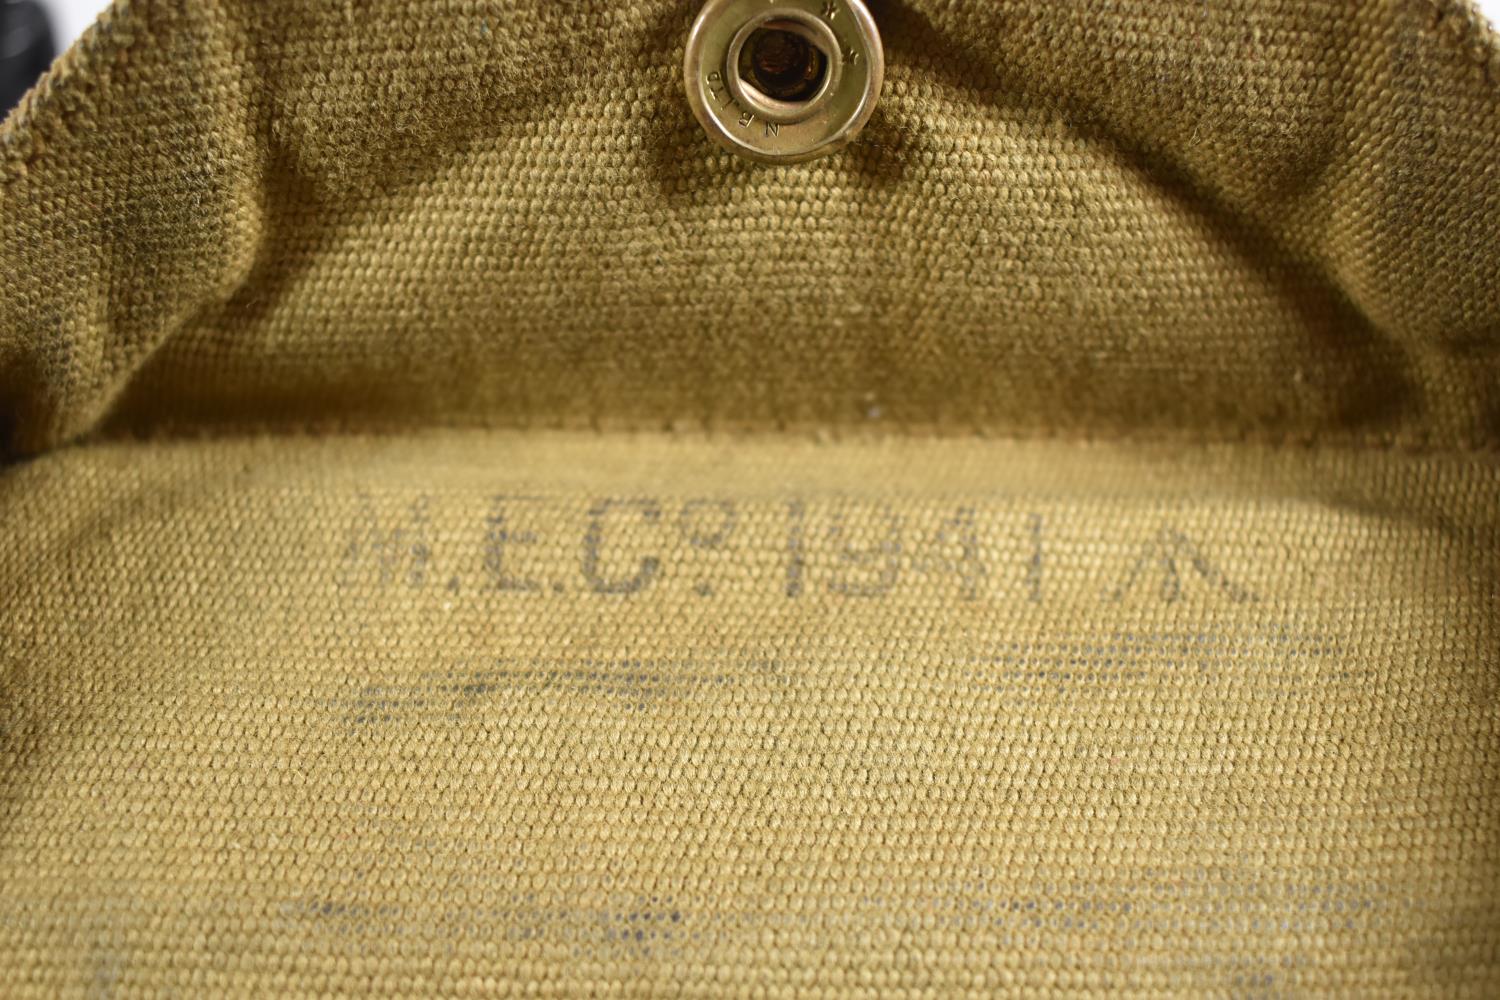 A Pair of WWII Taylor-Hobson Binoculars in Canvas Carrying Case, Stamped with War Department Arrow - Image 2 of 2